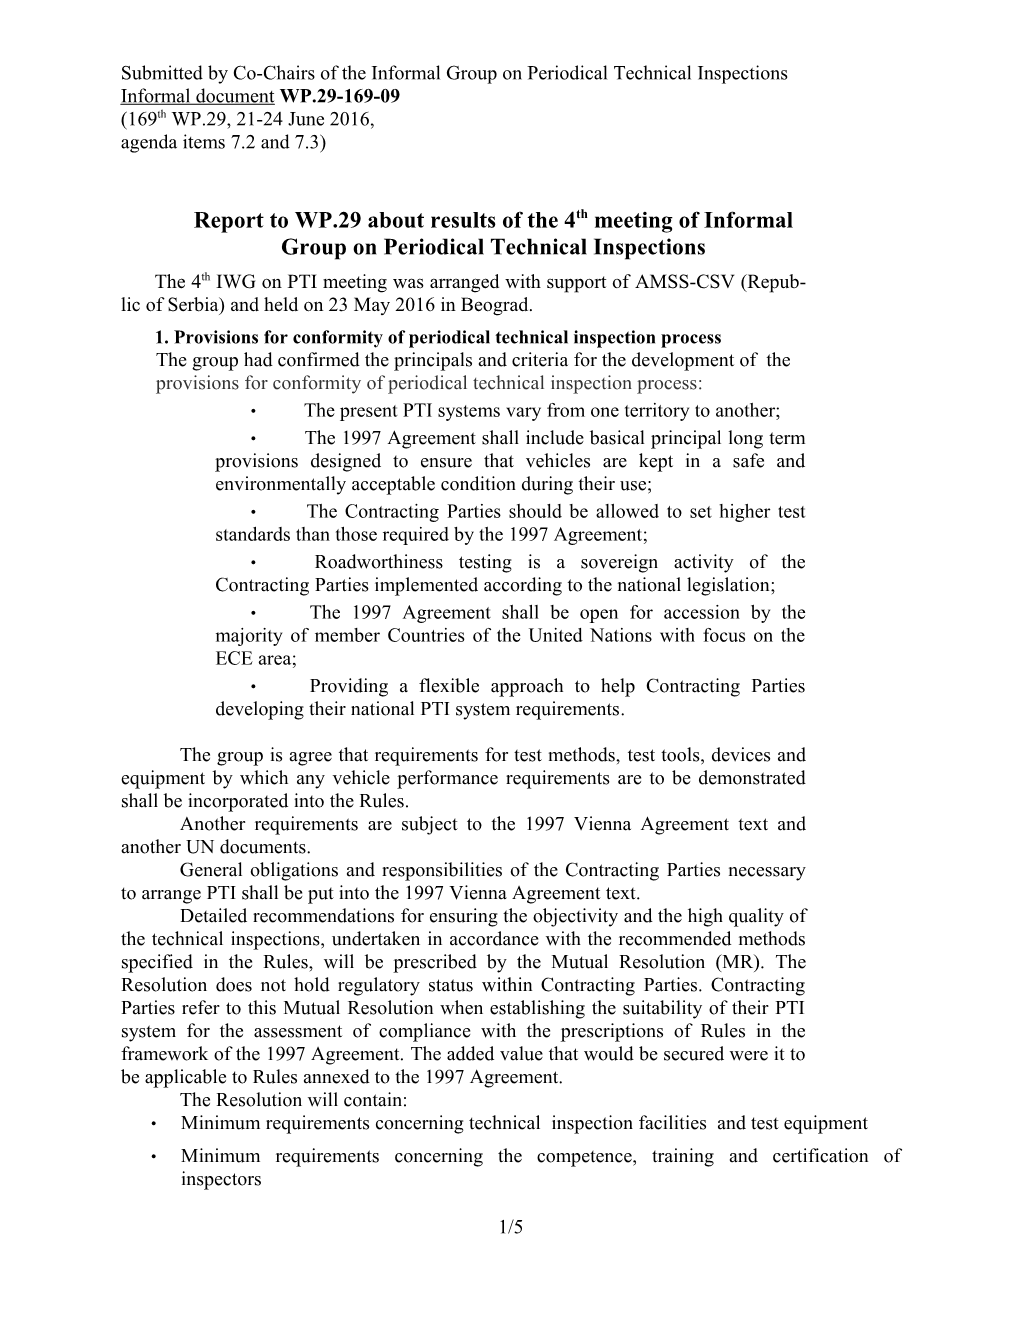 Report to WP.29 About Results of the 4Th Meeting of Informal Group on Periodical Technical